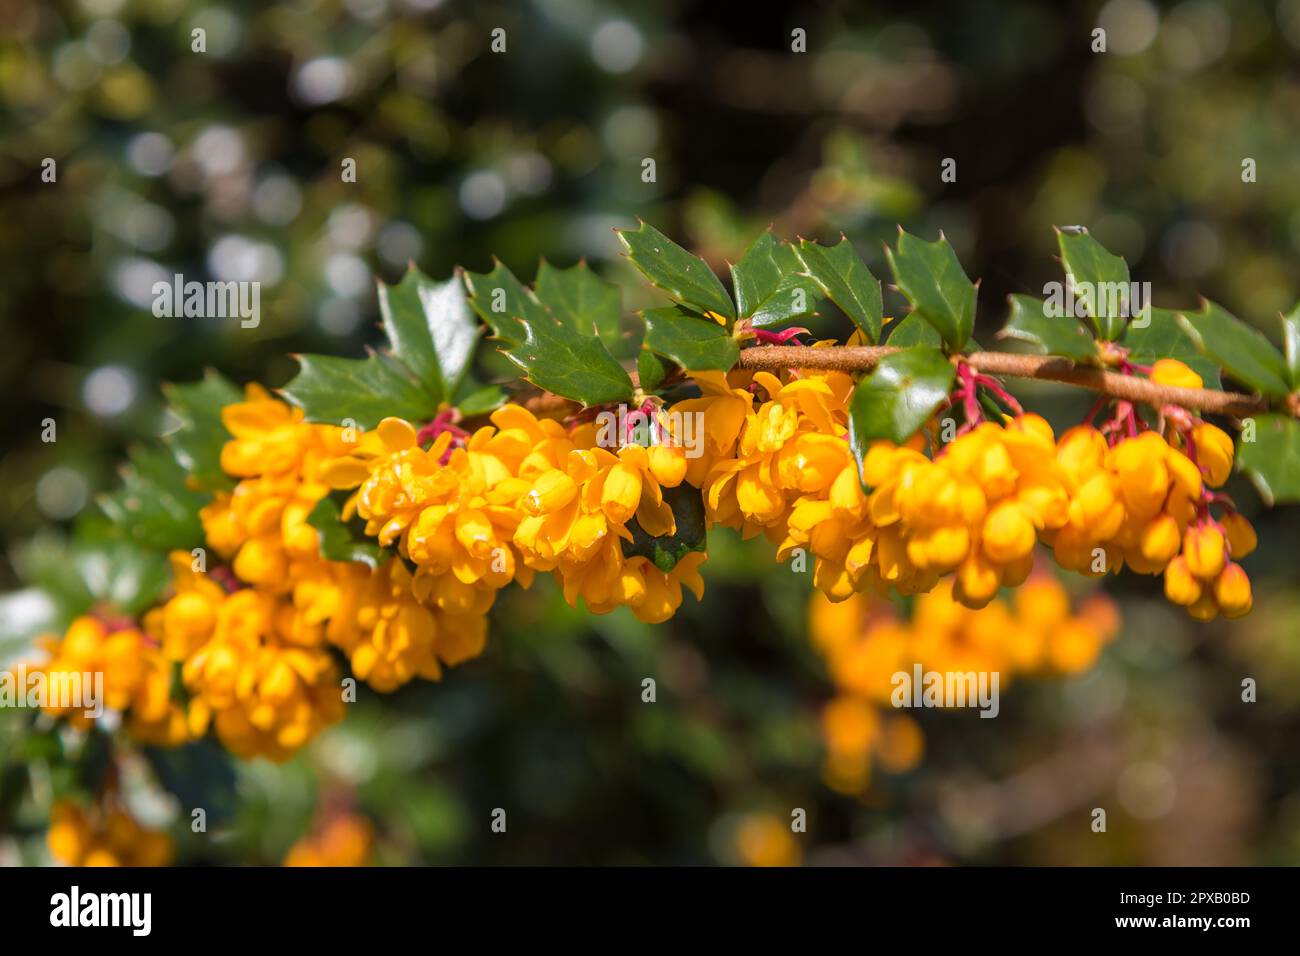 Darwin barberry with yellow flower in the garden Sedbergh, Yorkshire Dales, UK. Stock Photo